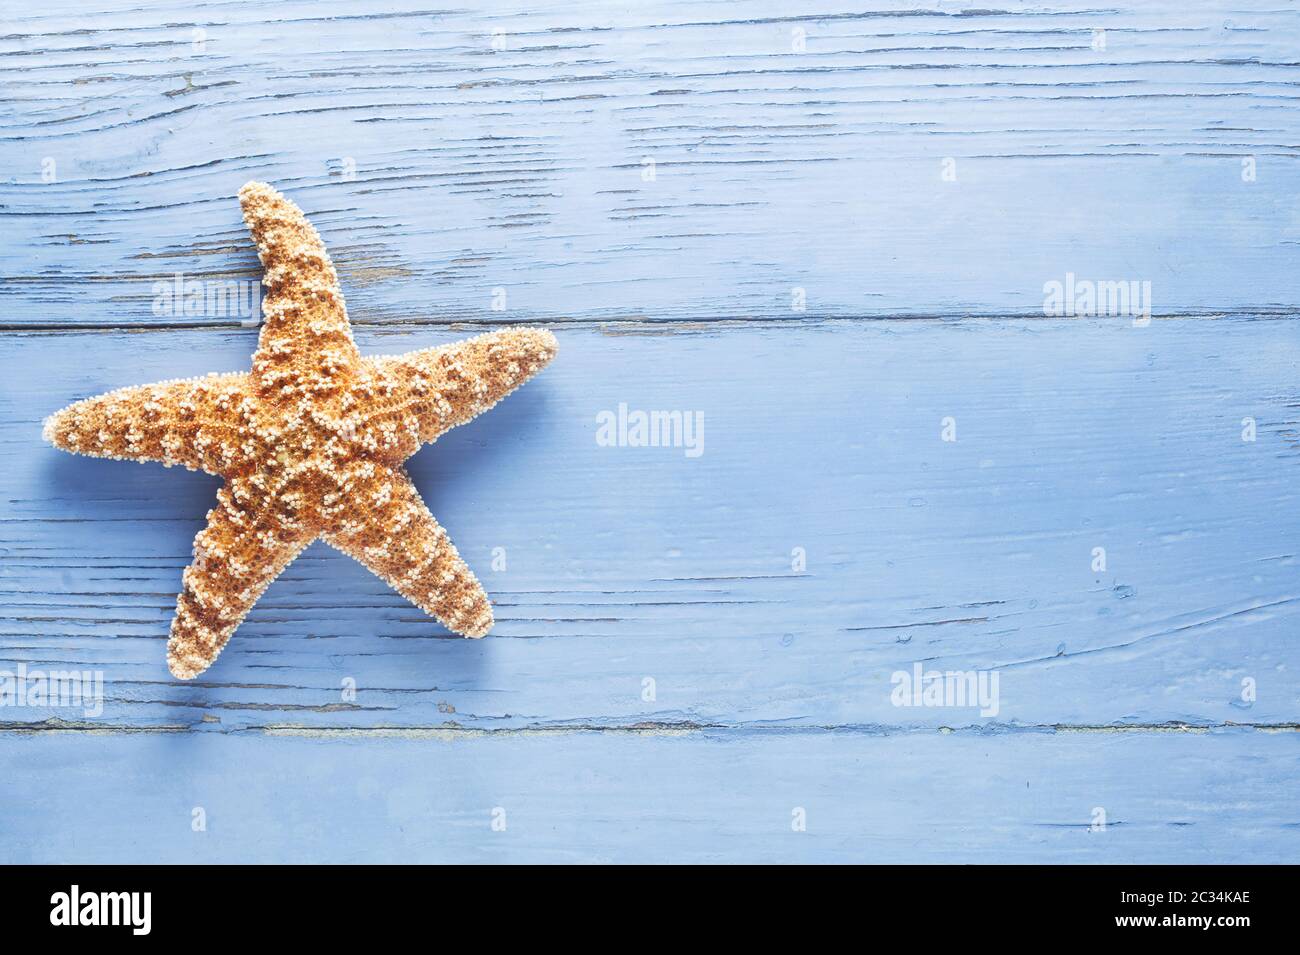 Maritime Background With A Starfish Stock Photo